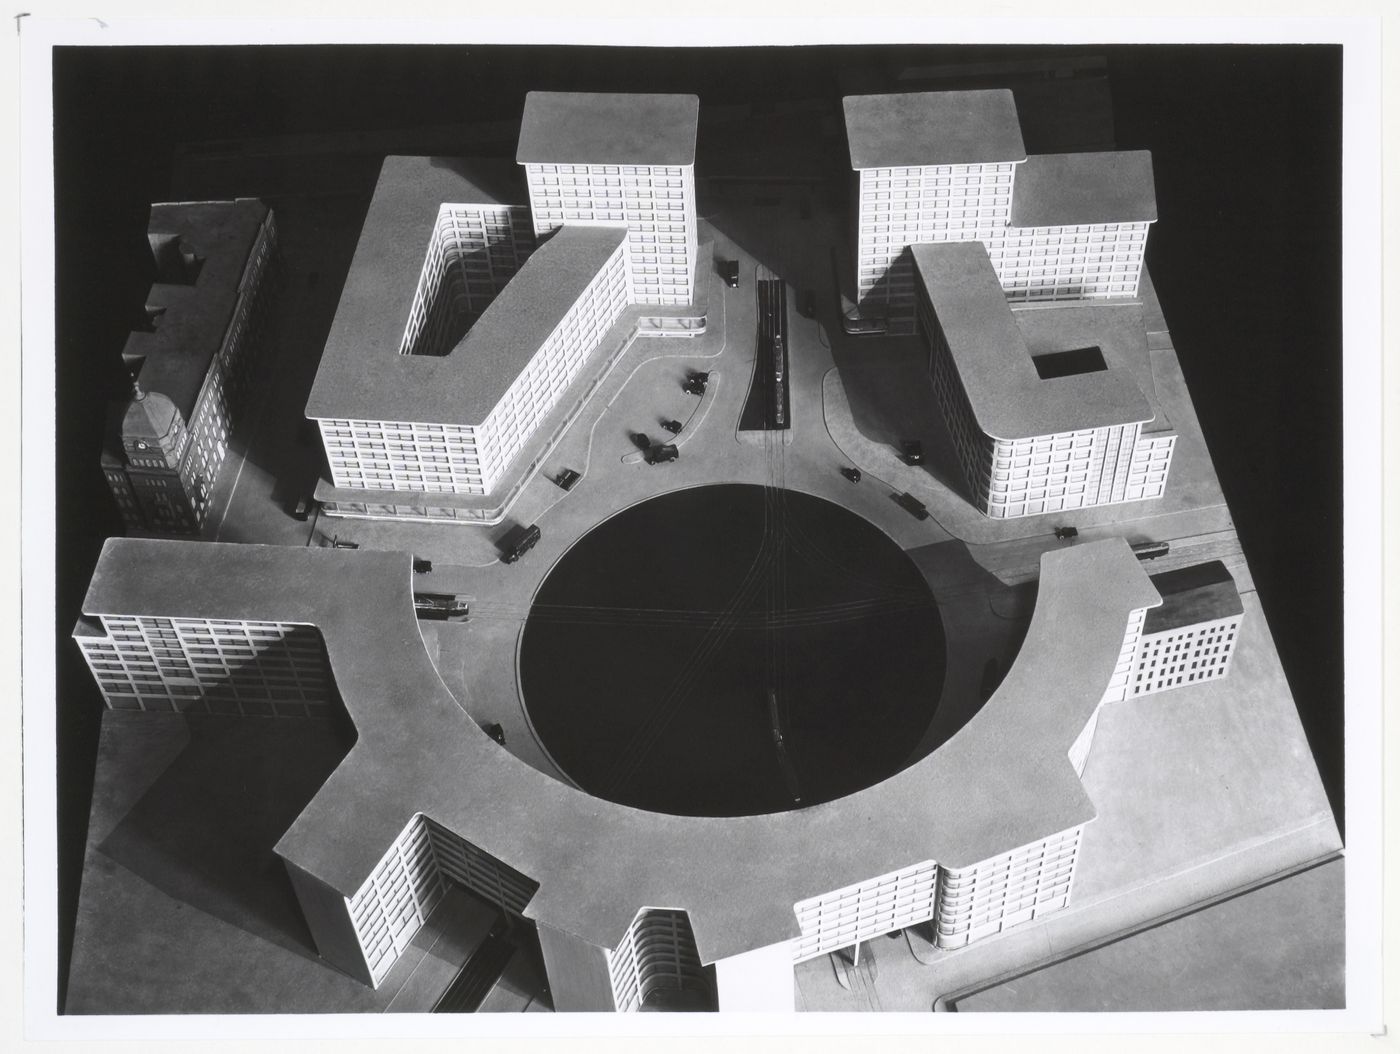 Photograph of a model designed as a prototype for the competition for the urban renewal of Alexanderplatz 1928-1929, Berlin